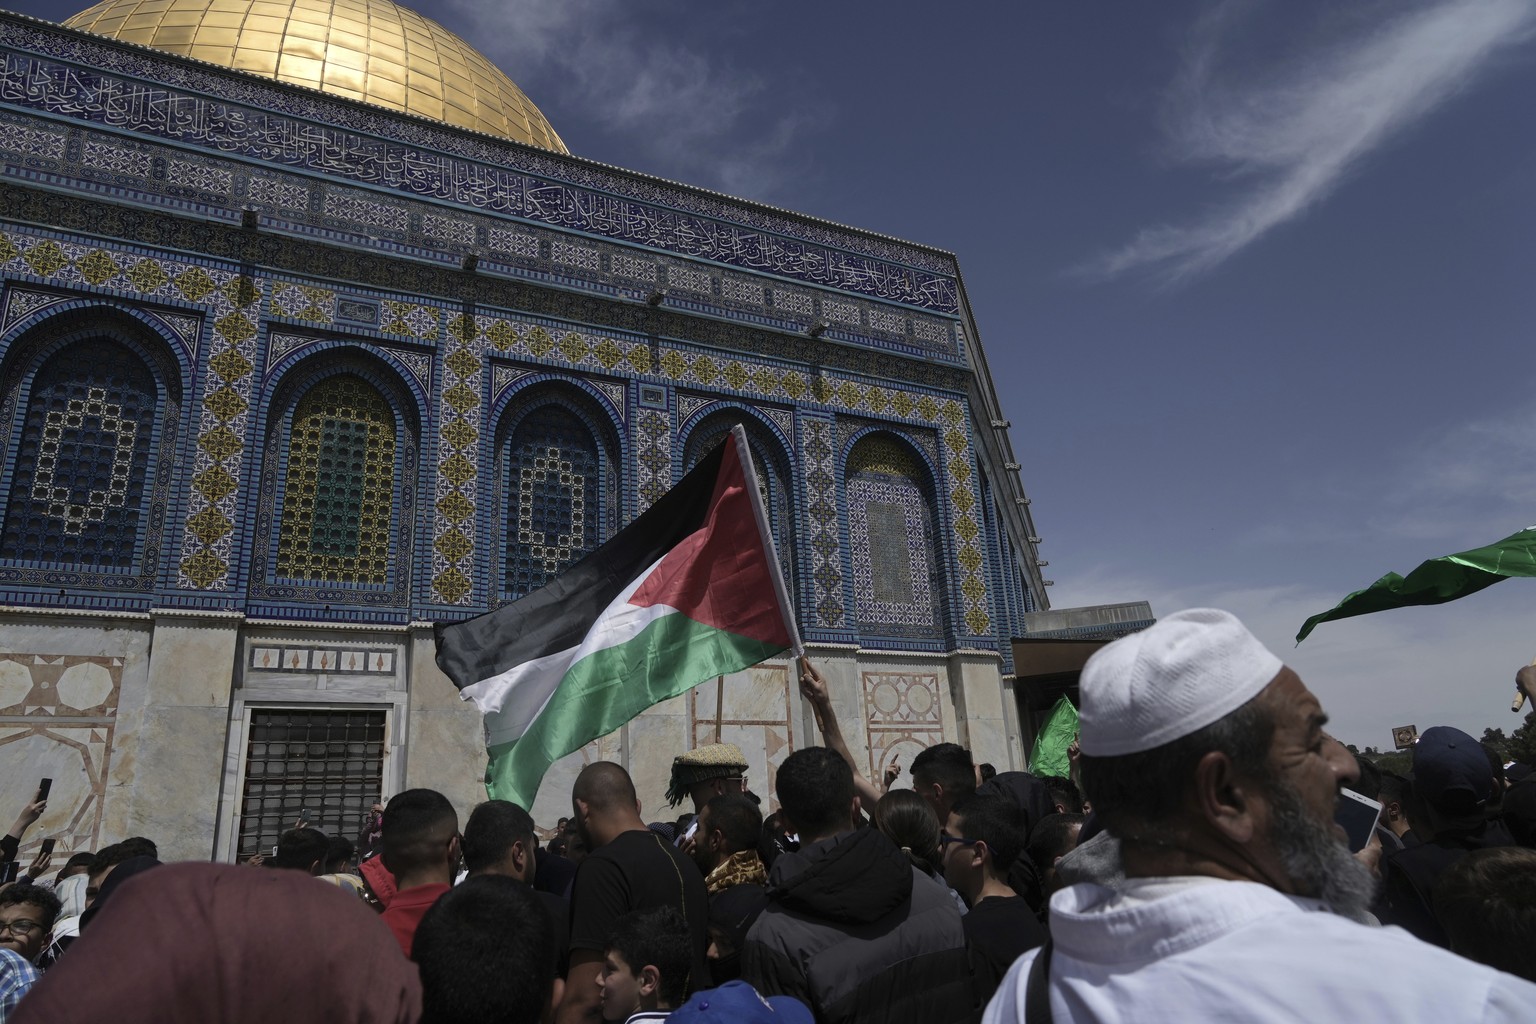 A worshipper waves the Palestinian flag after Friday prayers during the Muslim holy month of Ramadan, hours after Israeli police clashed with protesters at the Al Aqsa Mosque compound, in Jerusalem&#0 ...